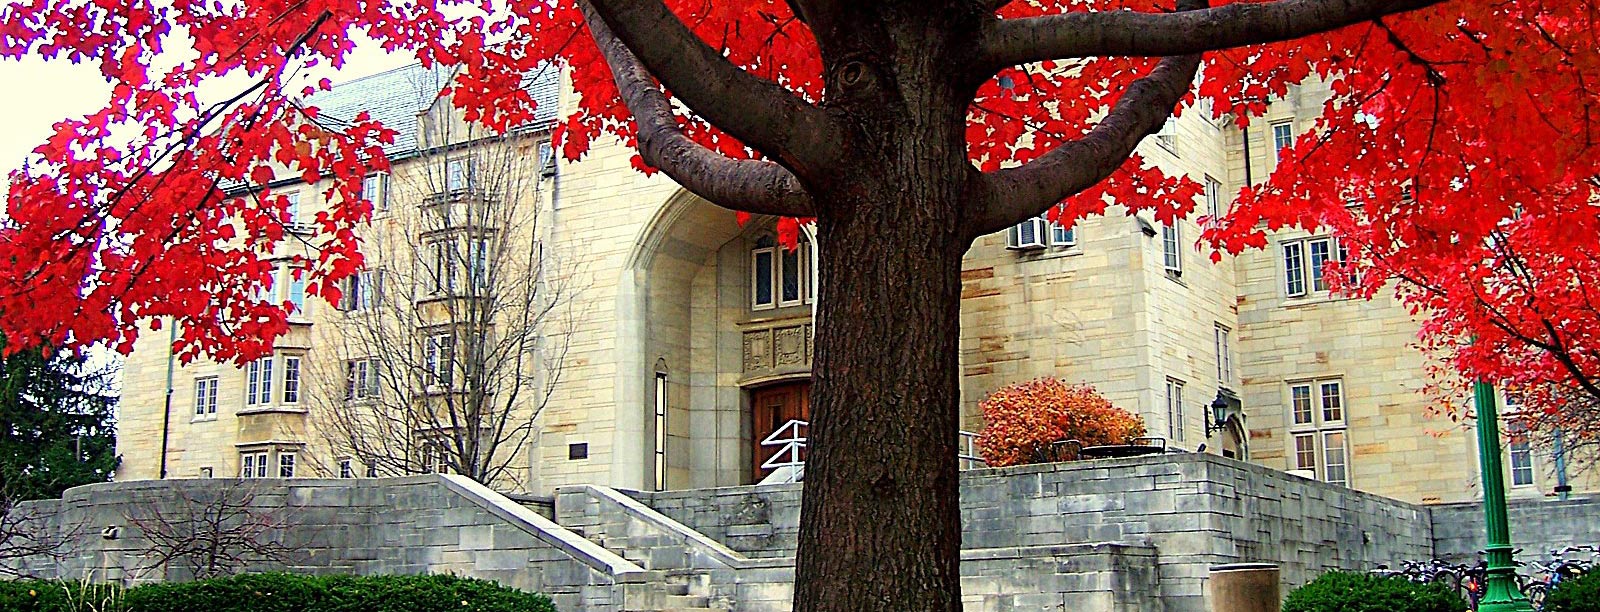 A large, old tree with sprawling red foliage stands in front of the main entrance to the Collins Center